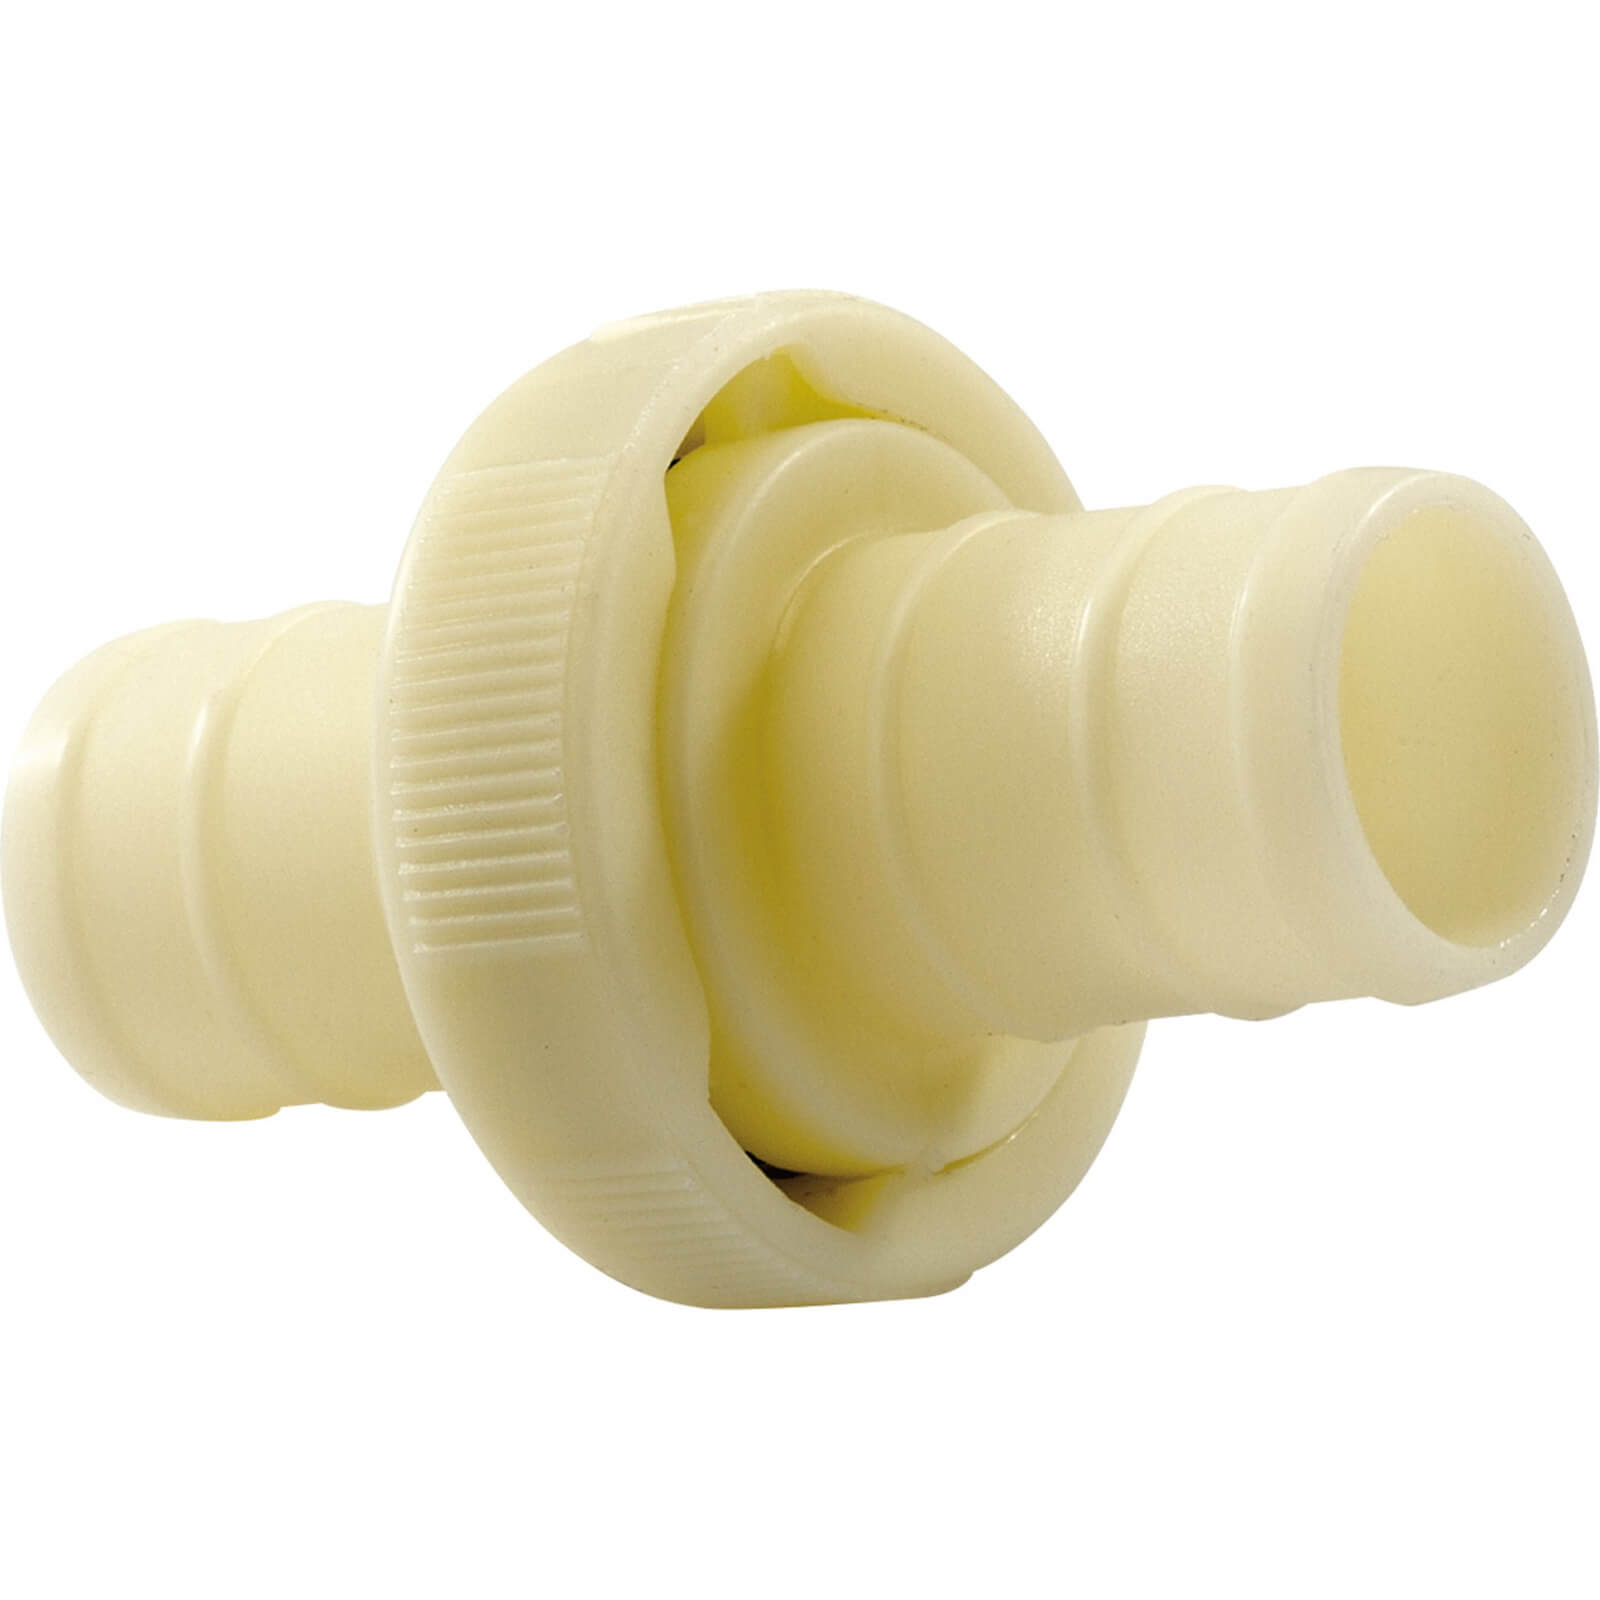 Image of Draper Lay Flat Hose Coupling Adaptor or Connector 1" / 25mm